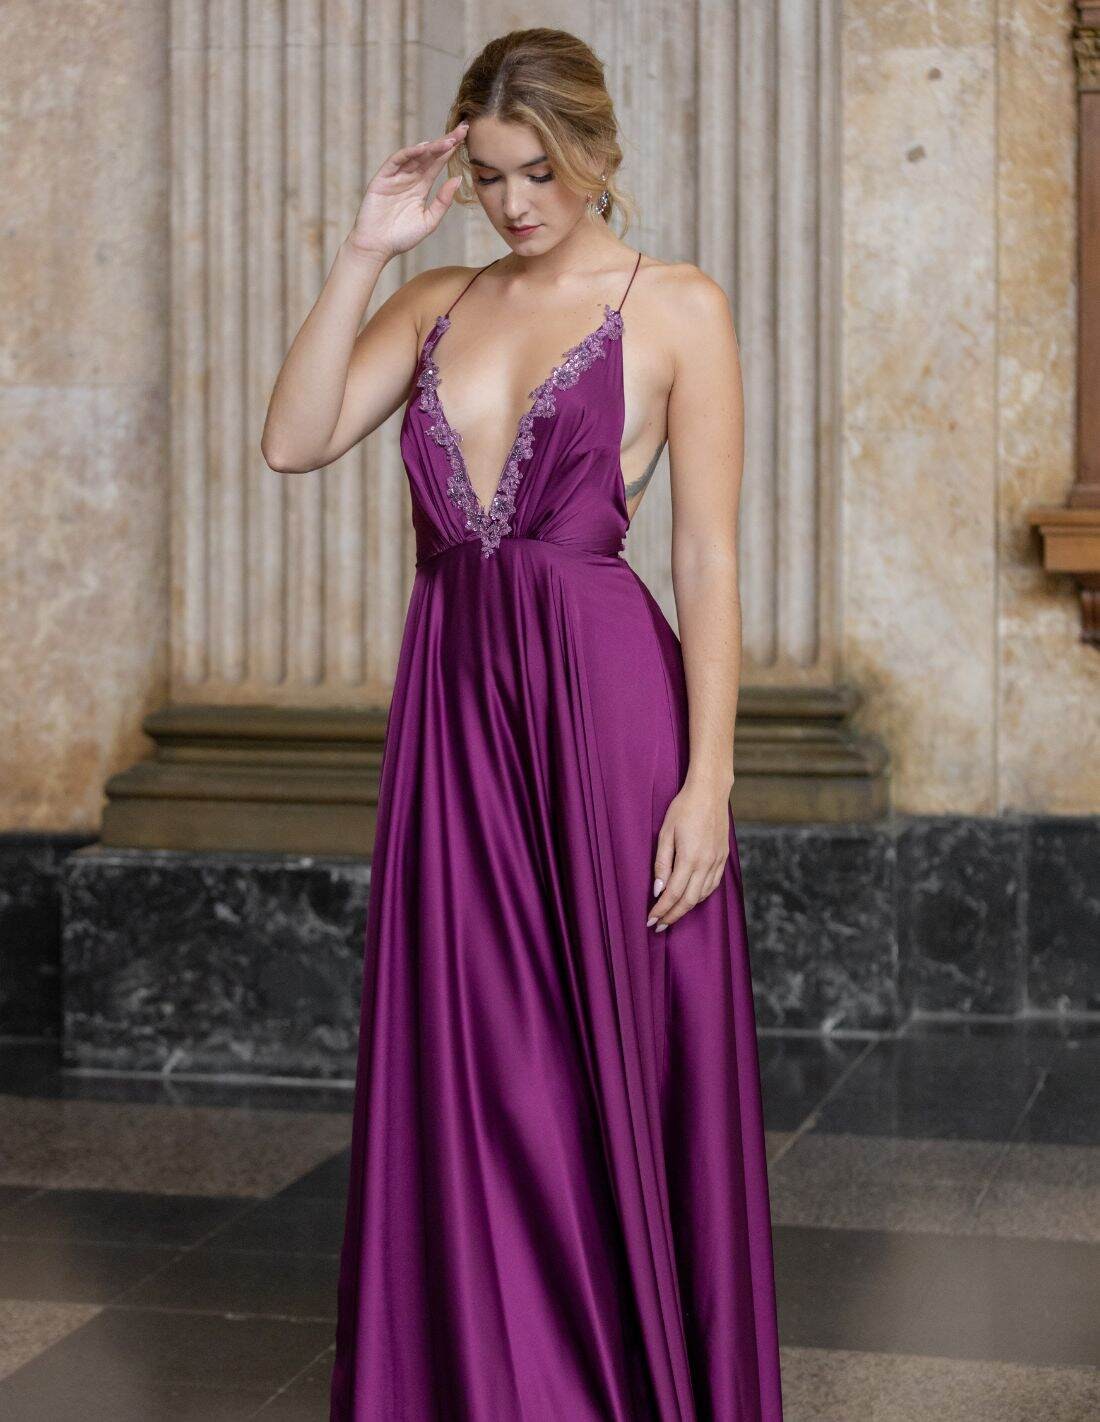 Long satin party dress with open back | INVITADISIMA